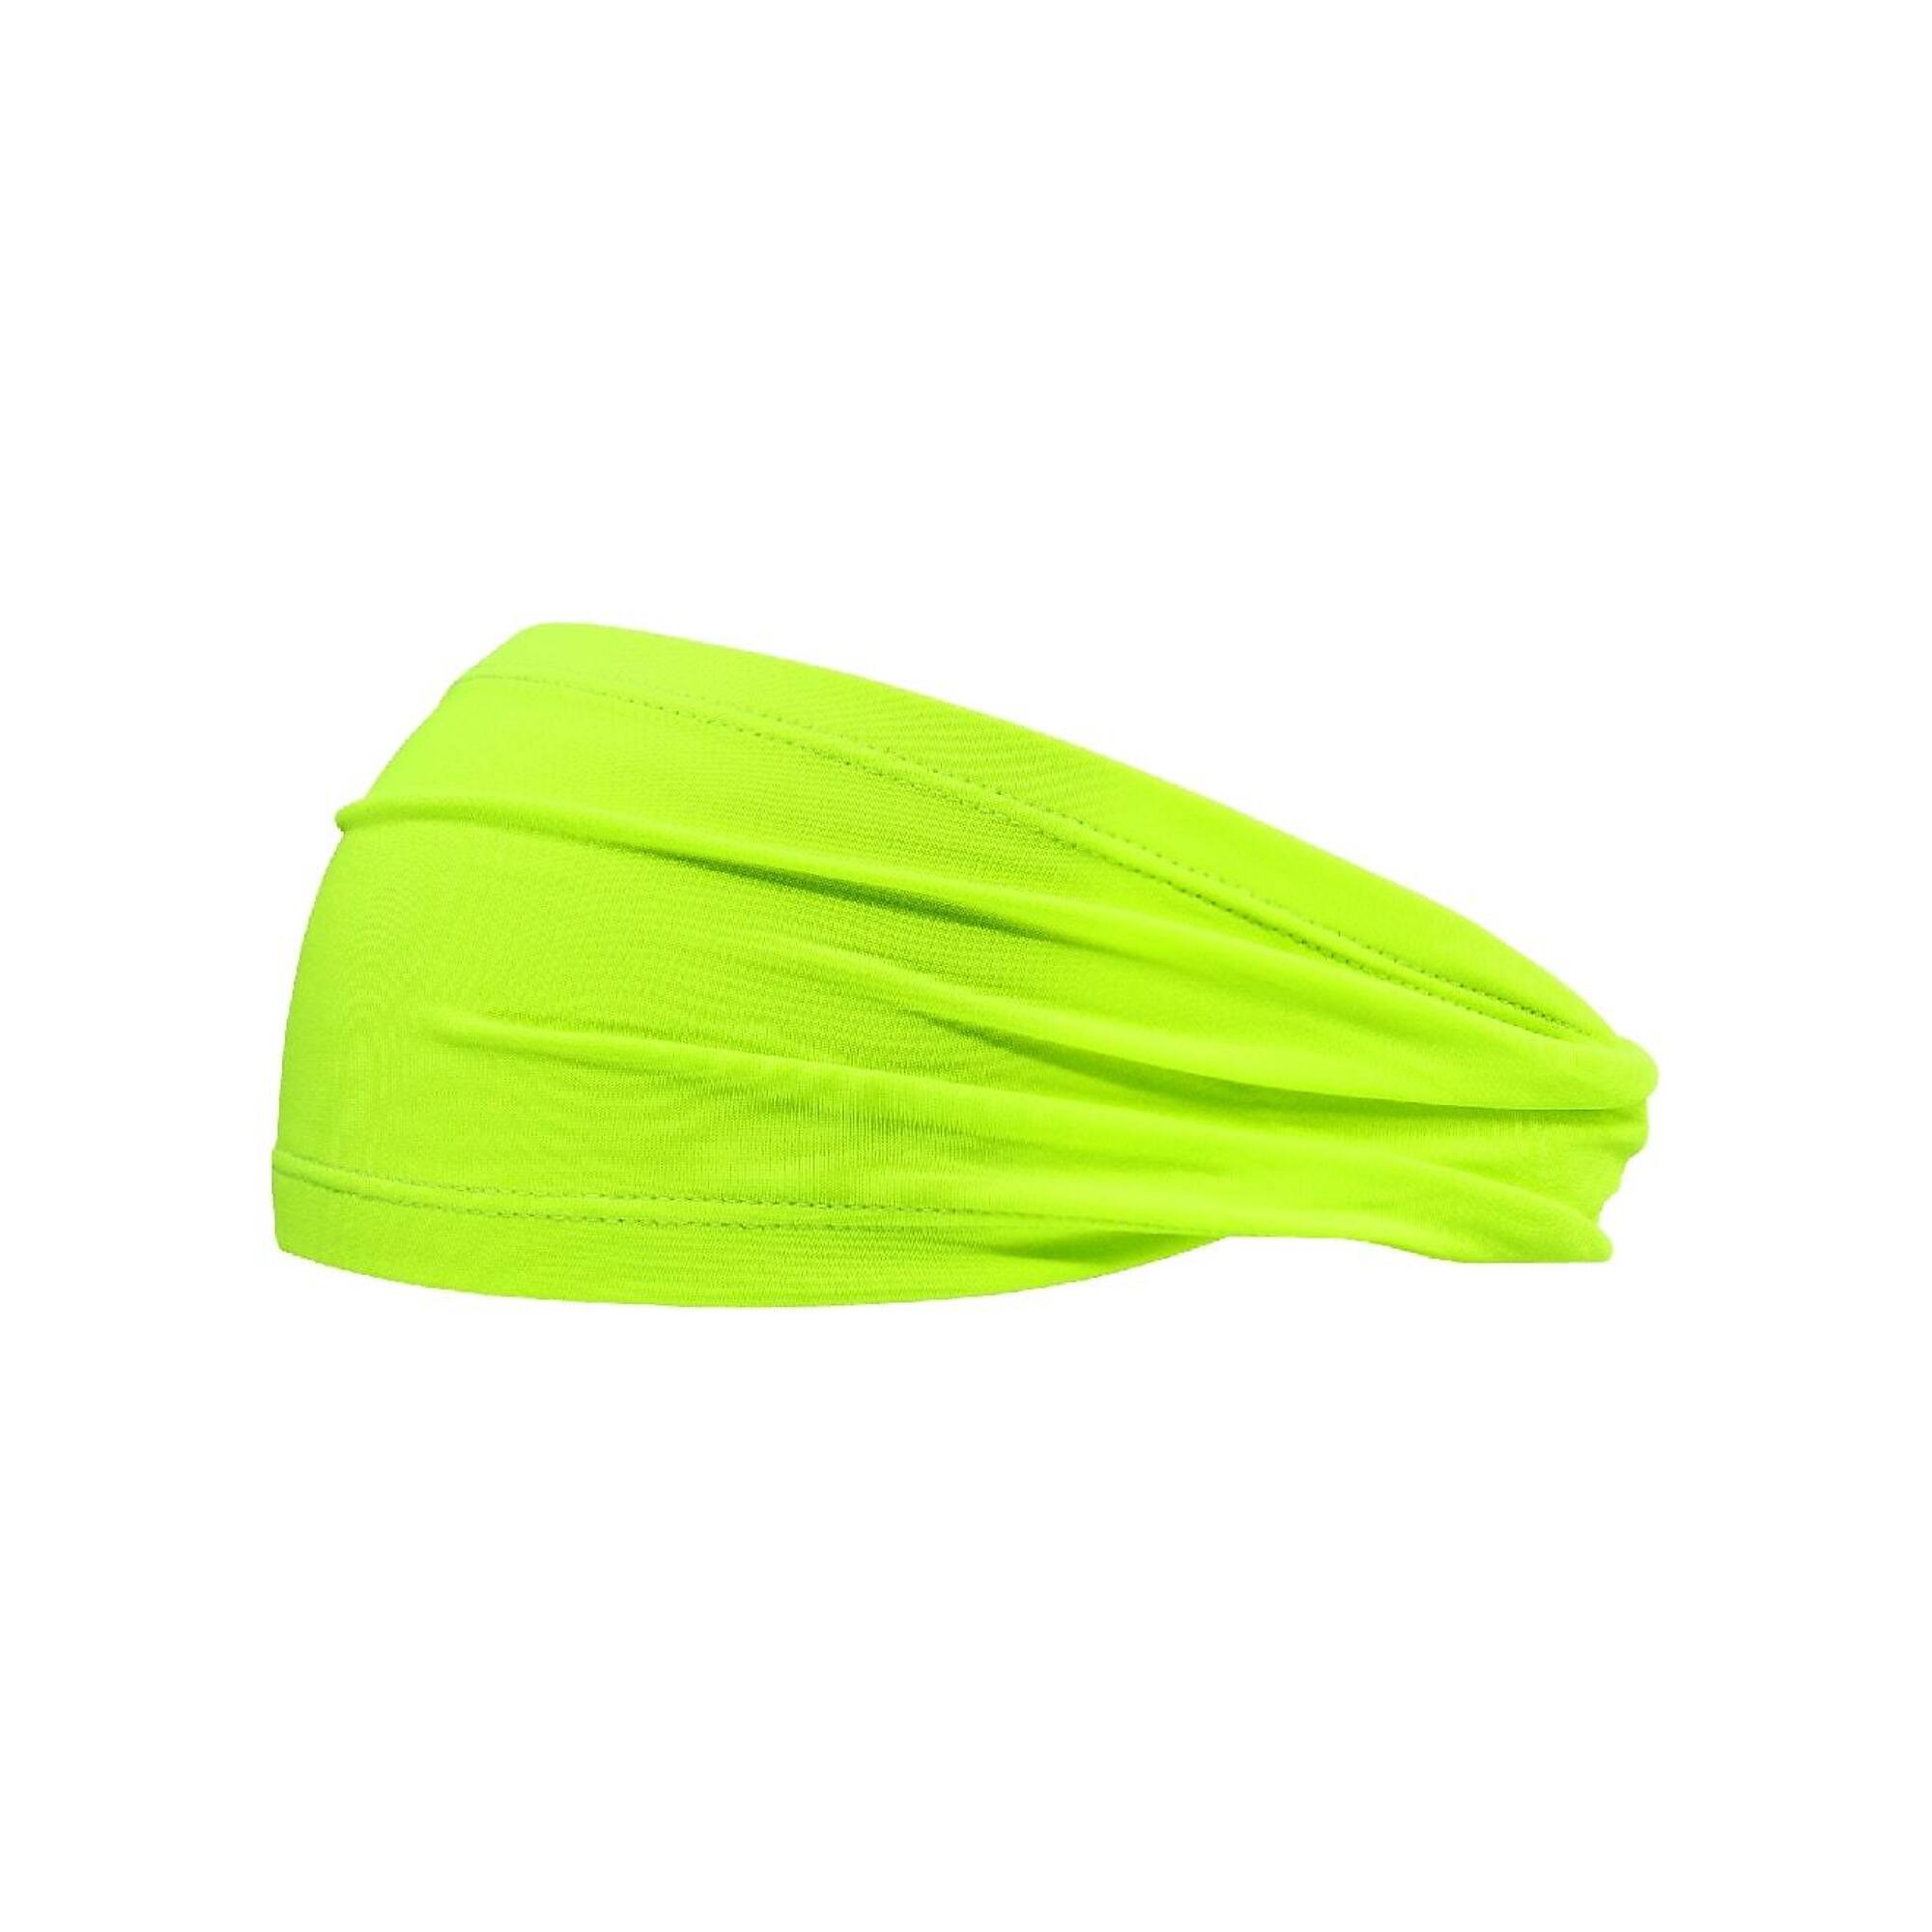 FrogWear, Yellow/Green Tapered Cooling Headband - 6 Pack, Size One Size, Material Polyester, Model HB-401